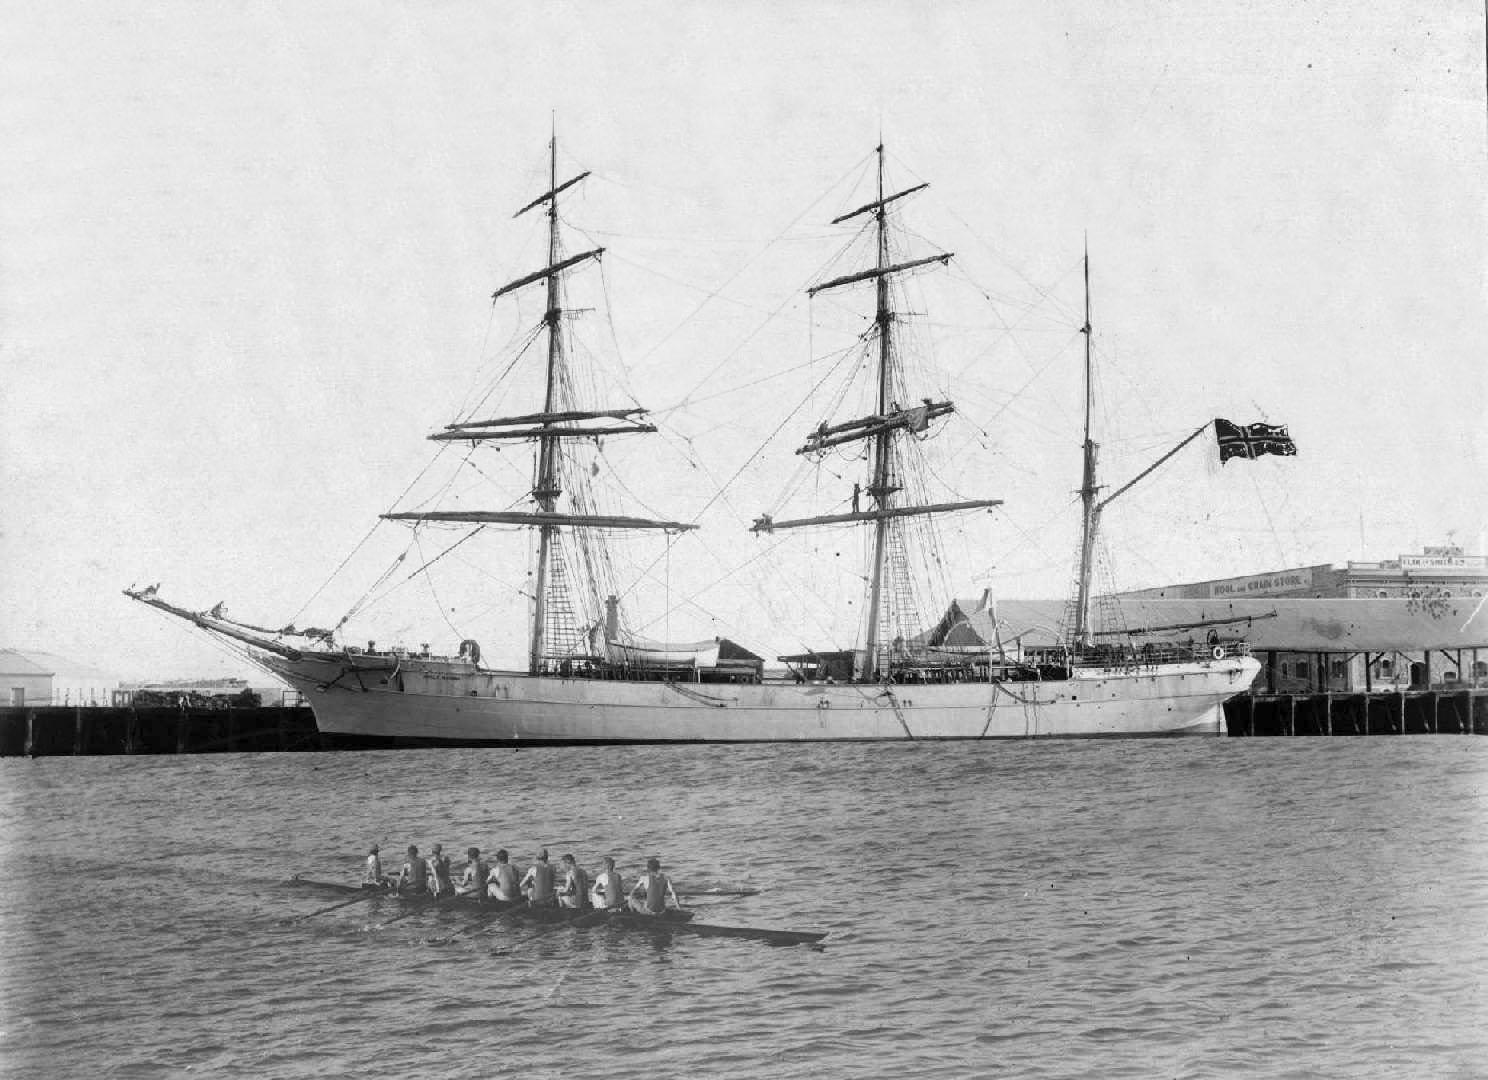 Barque built in 1876.